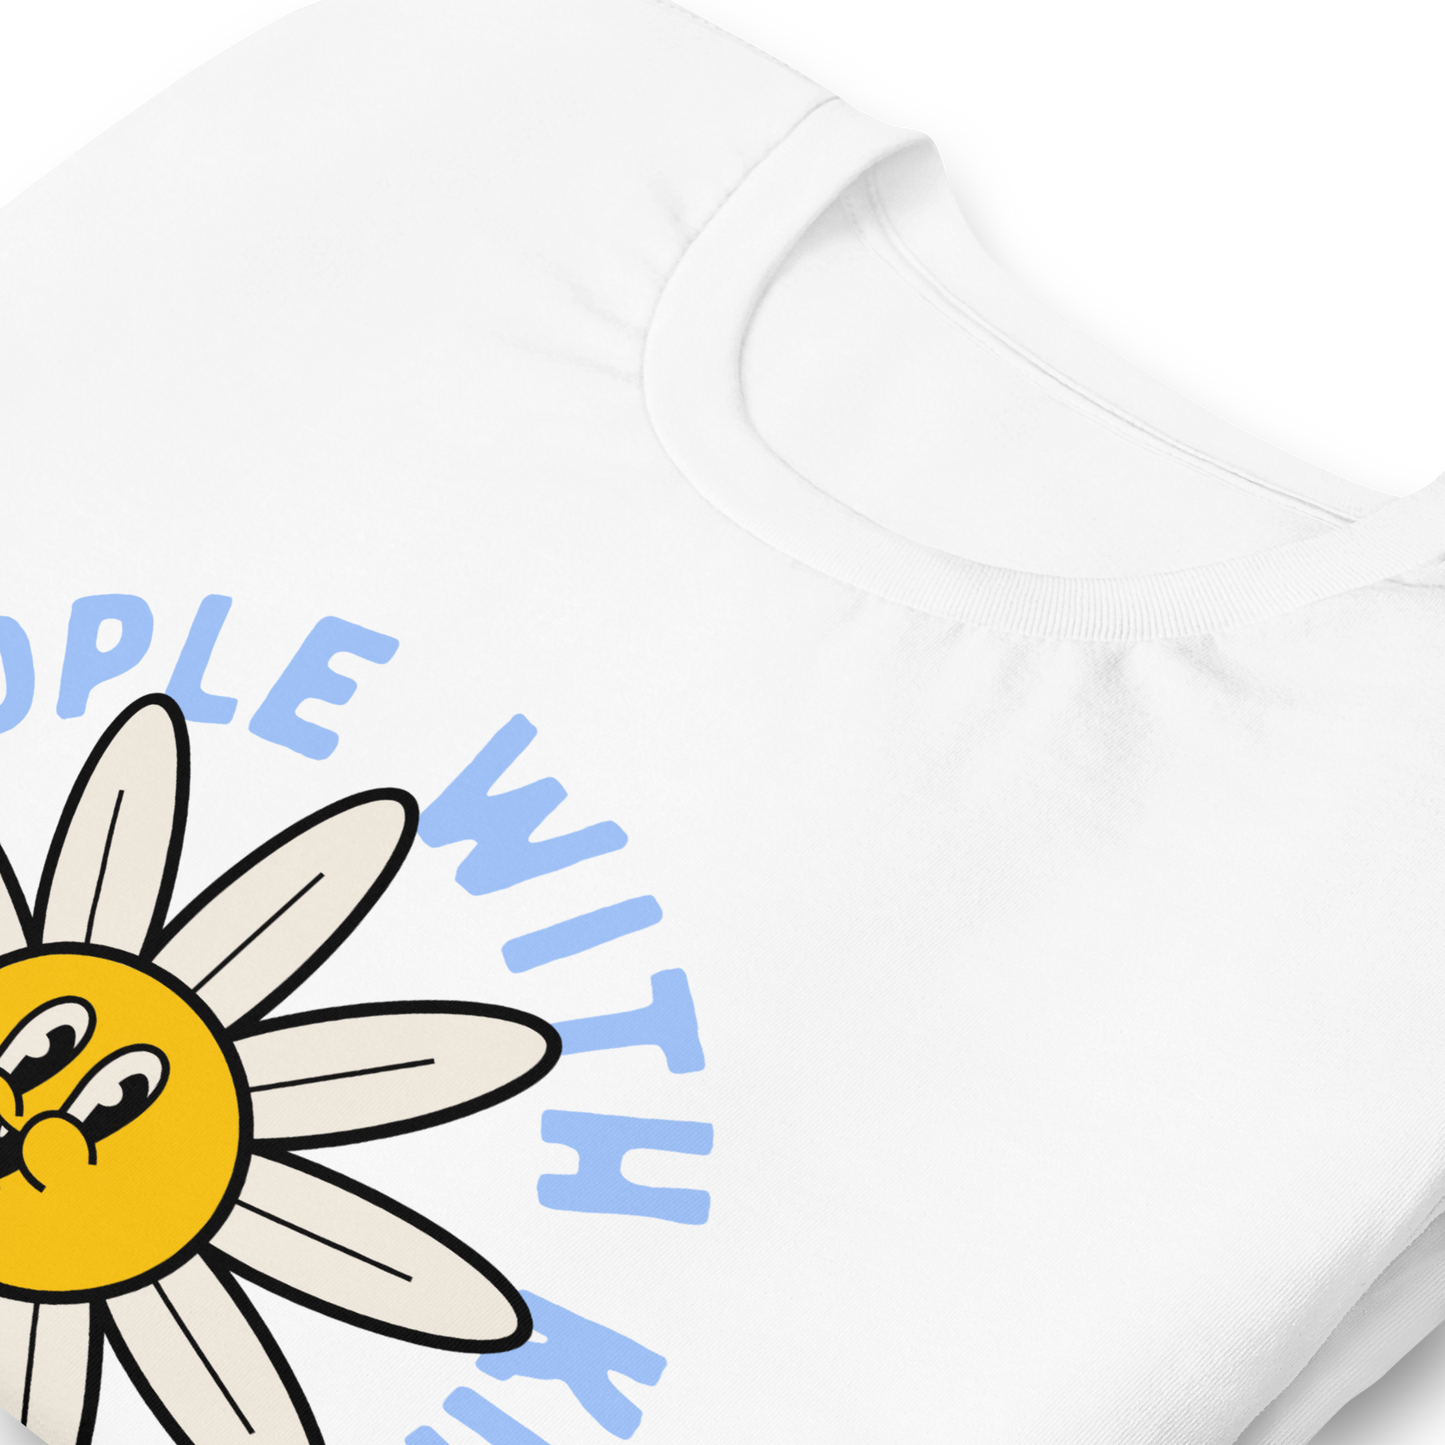 Daisy Treat People With Kindness Harry Styles T-Shirt